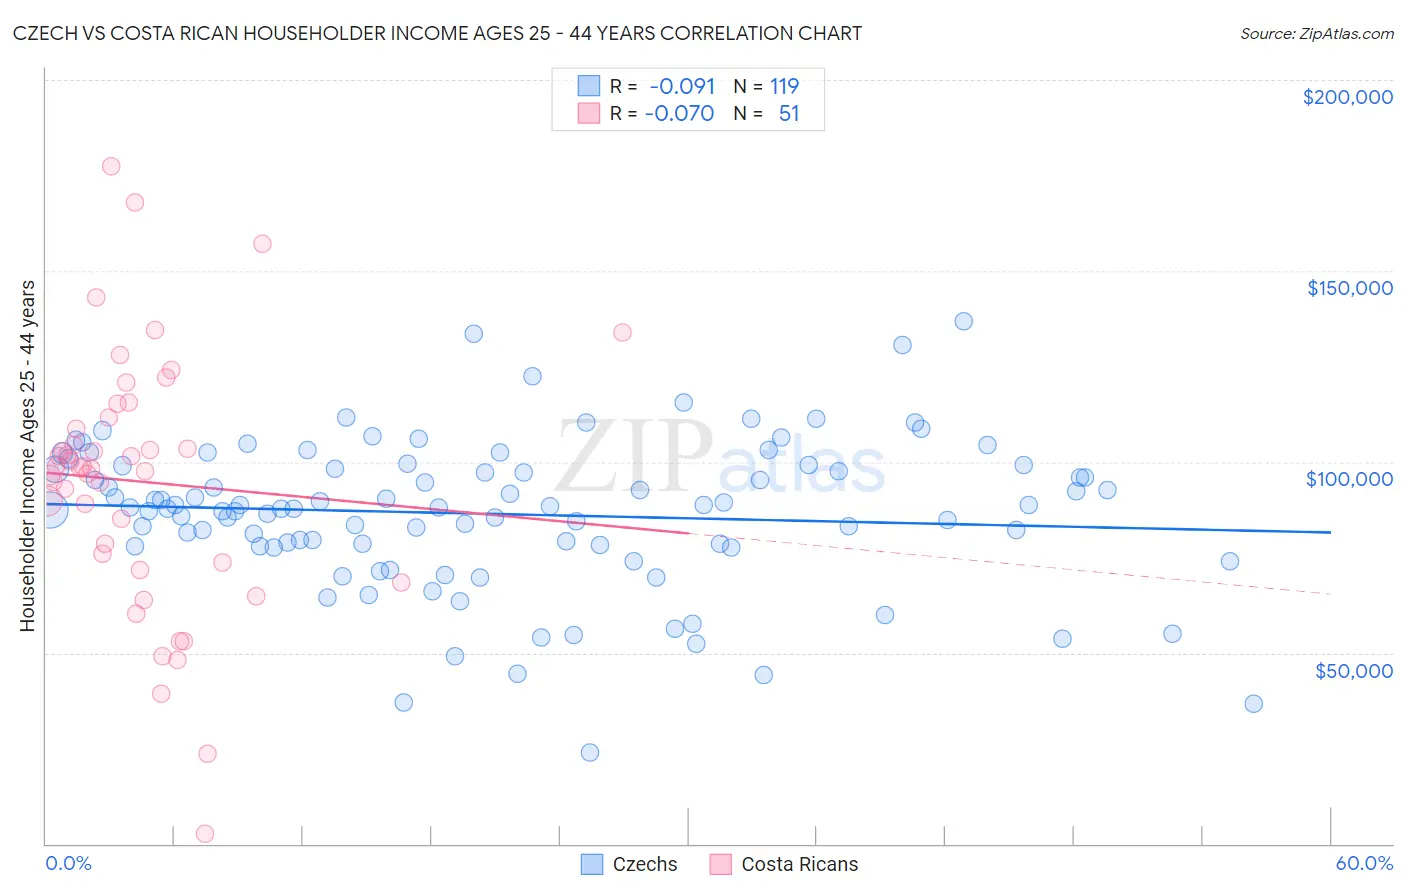 Czech vs Costa Rican Householder Income Ages 25 - 44 years